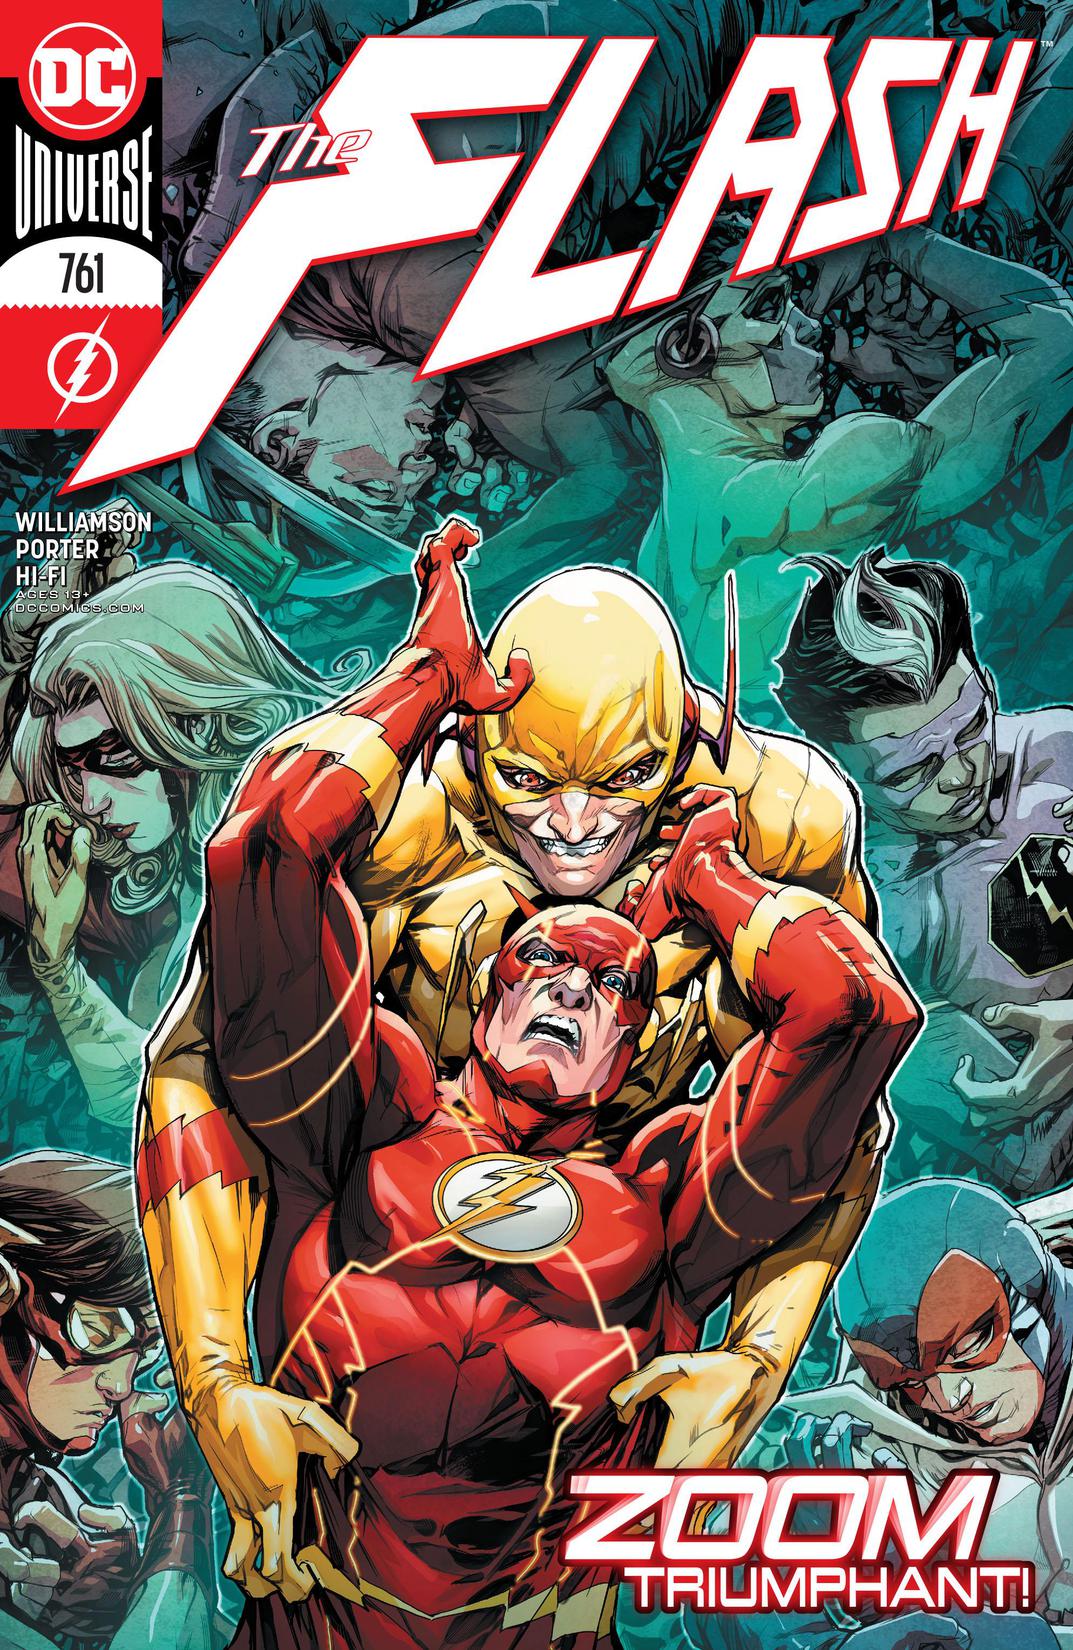 The Flash (2016-) #761 preview images